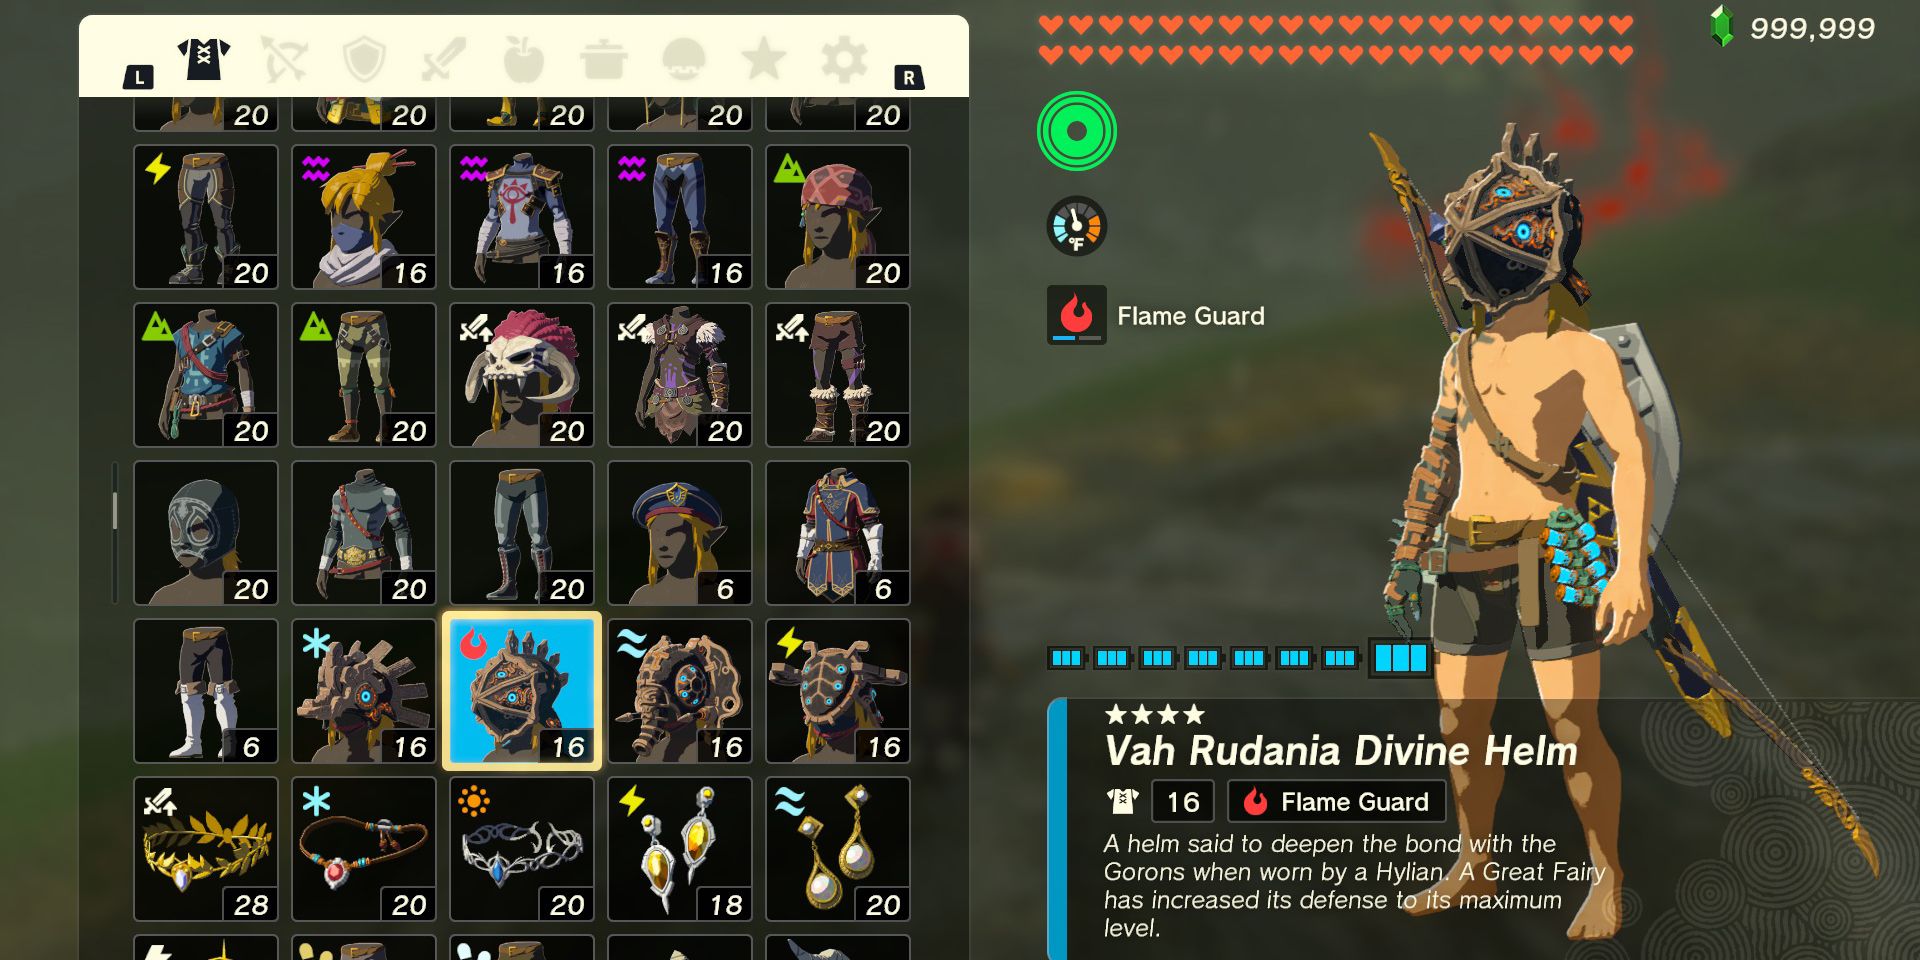 The Vah Rudania Divine Helm armor piece in The Legend of Zelda: Tears of the Kingdom